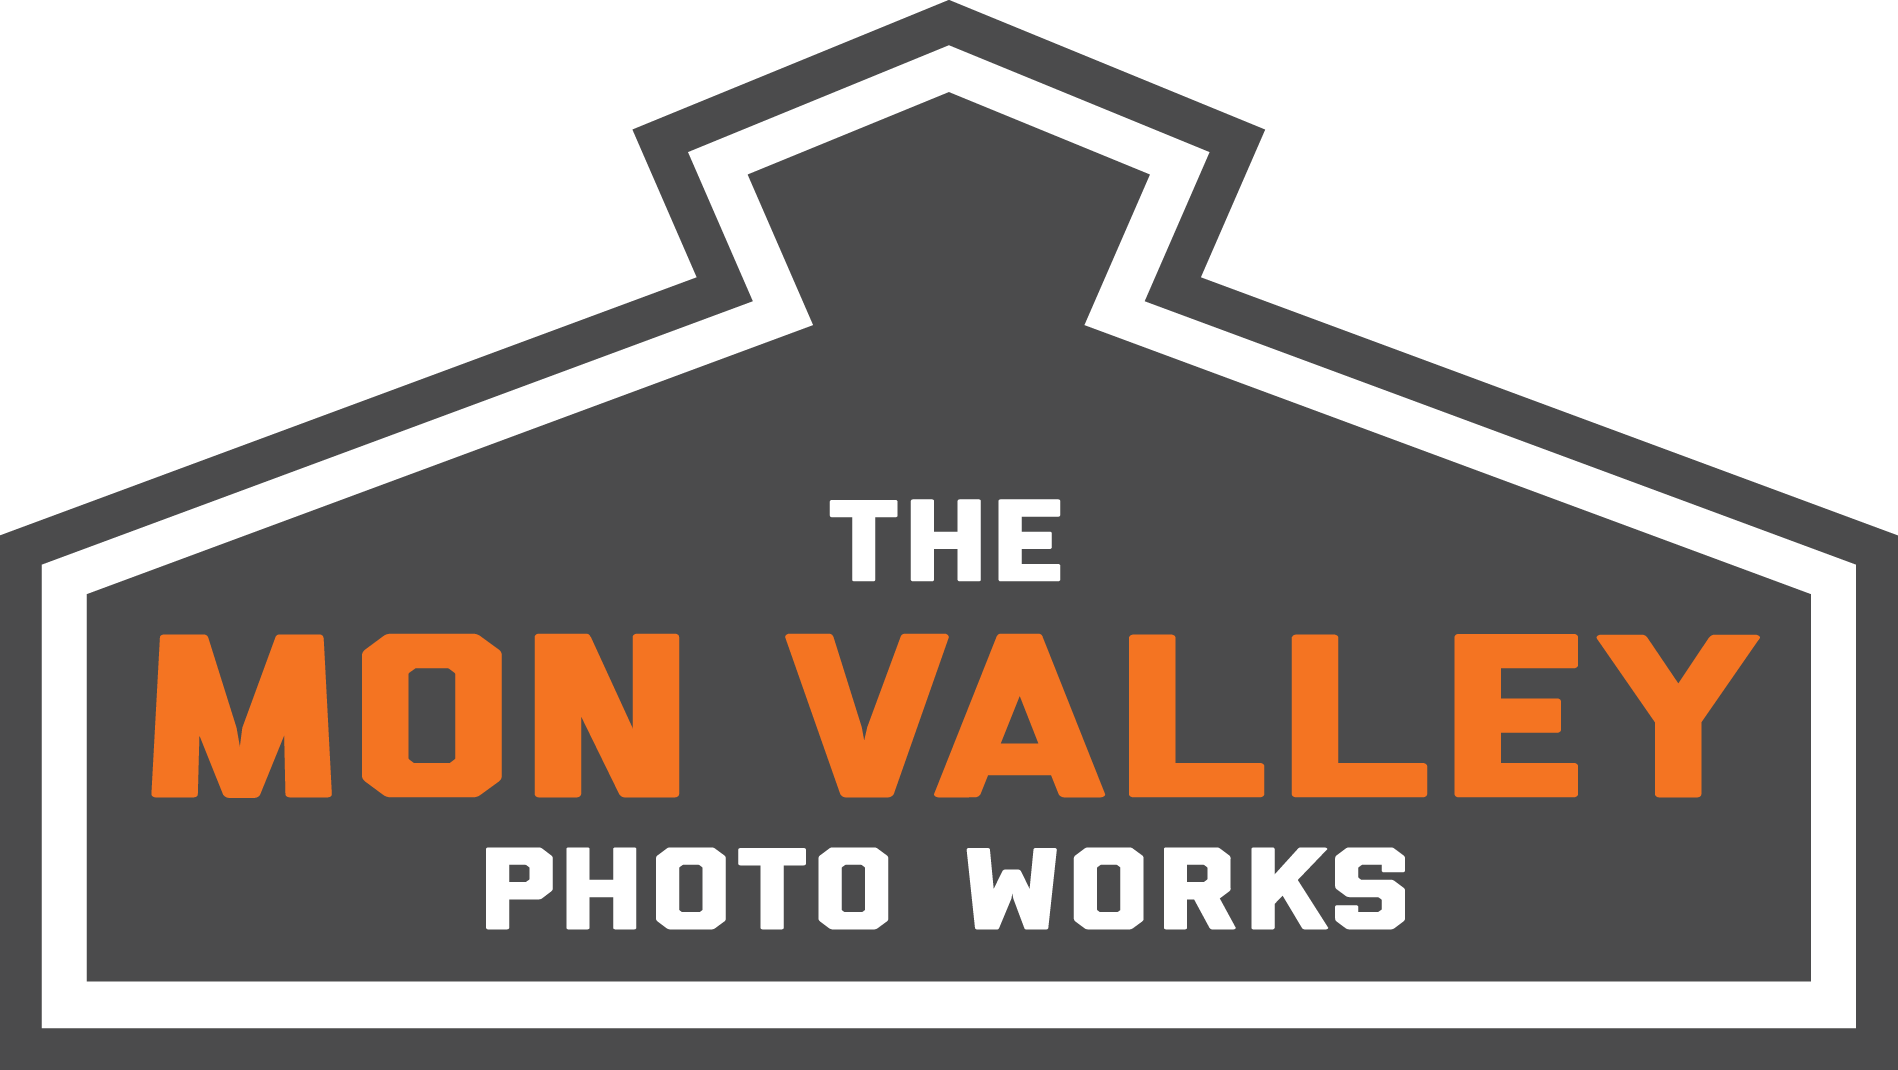 The Mon Valley Photo Works